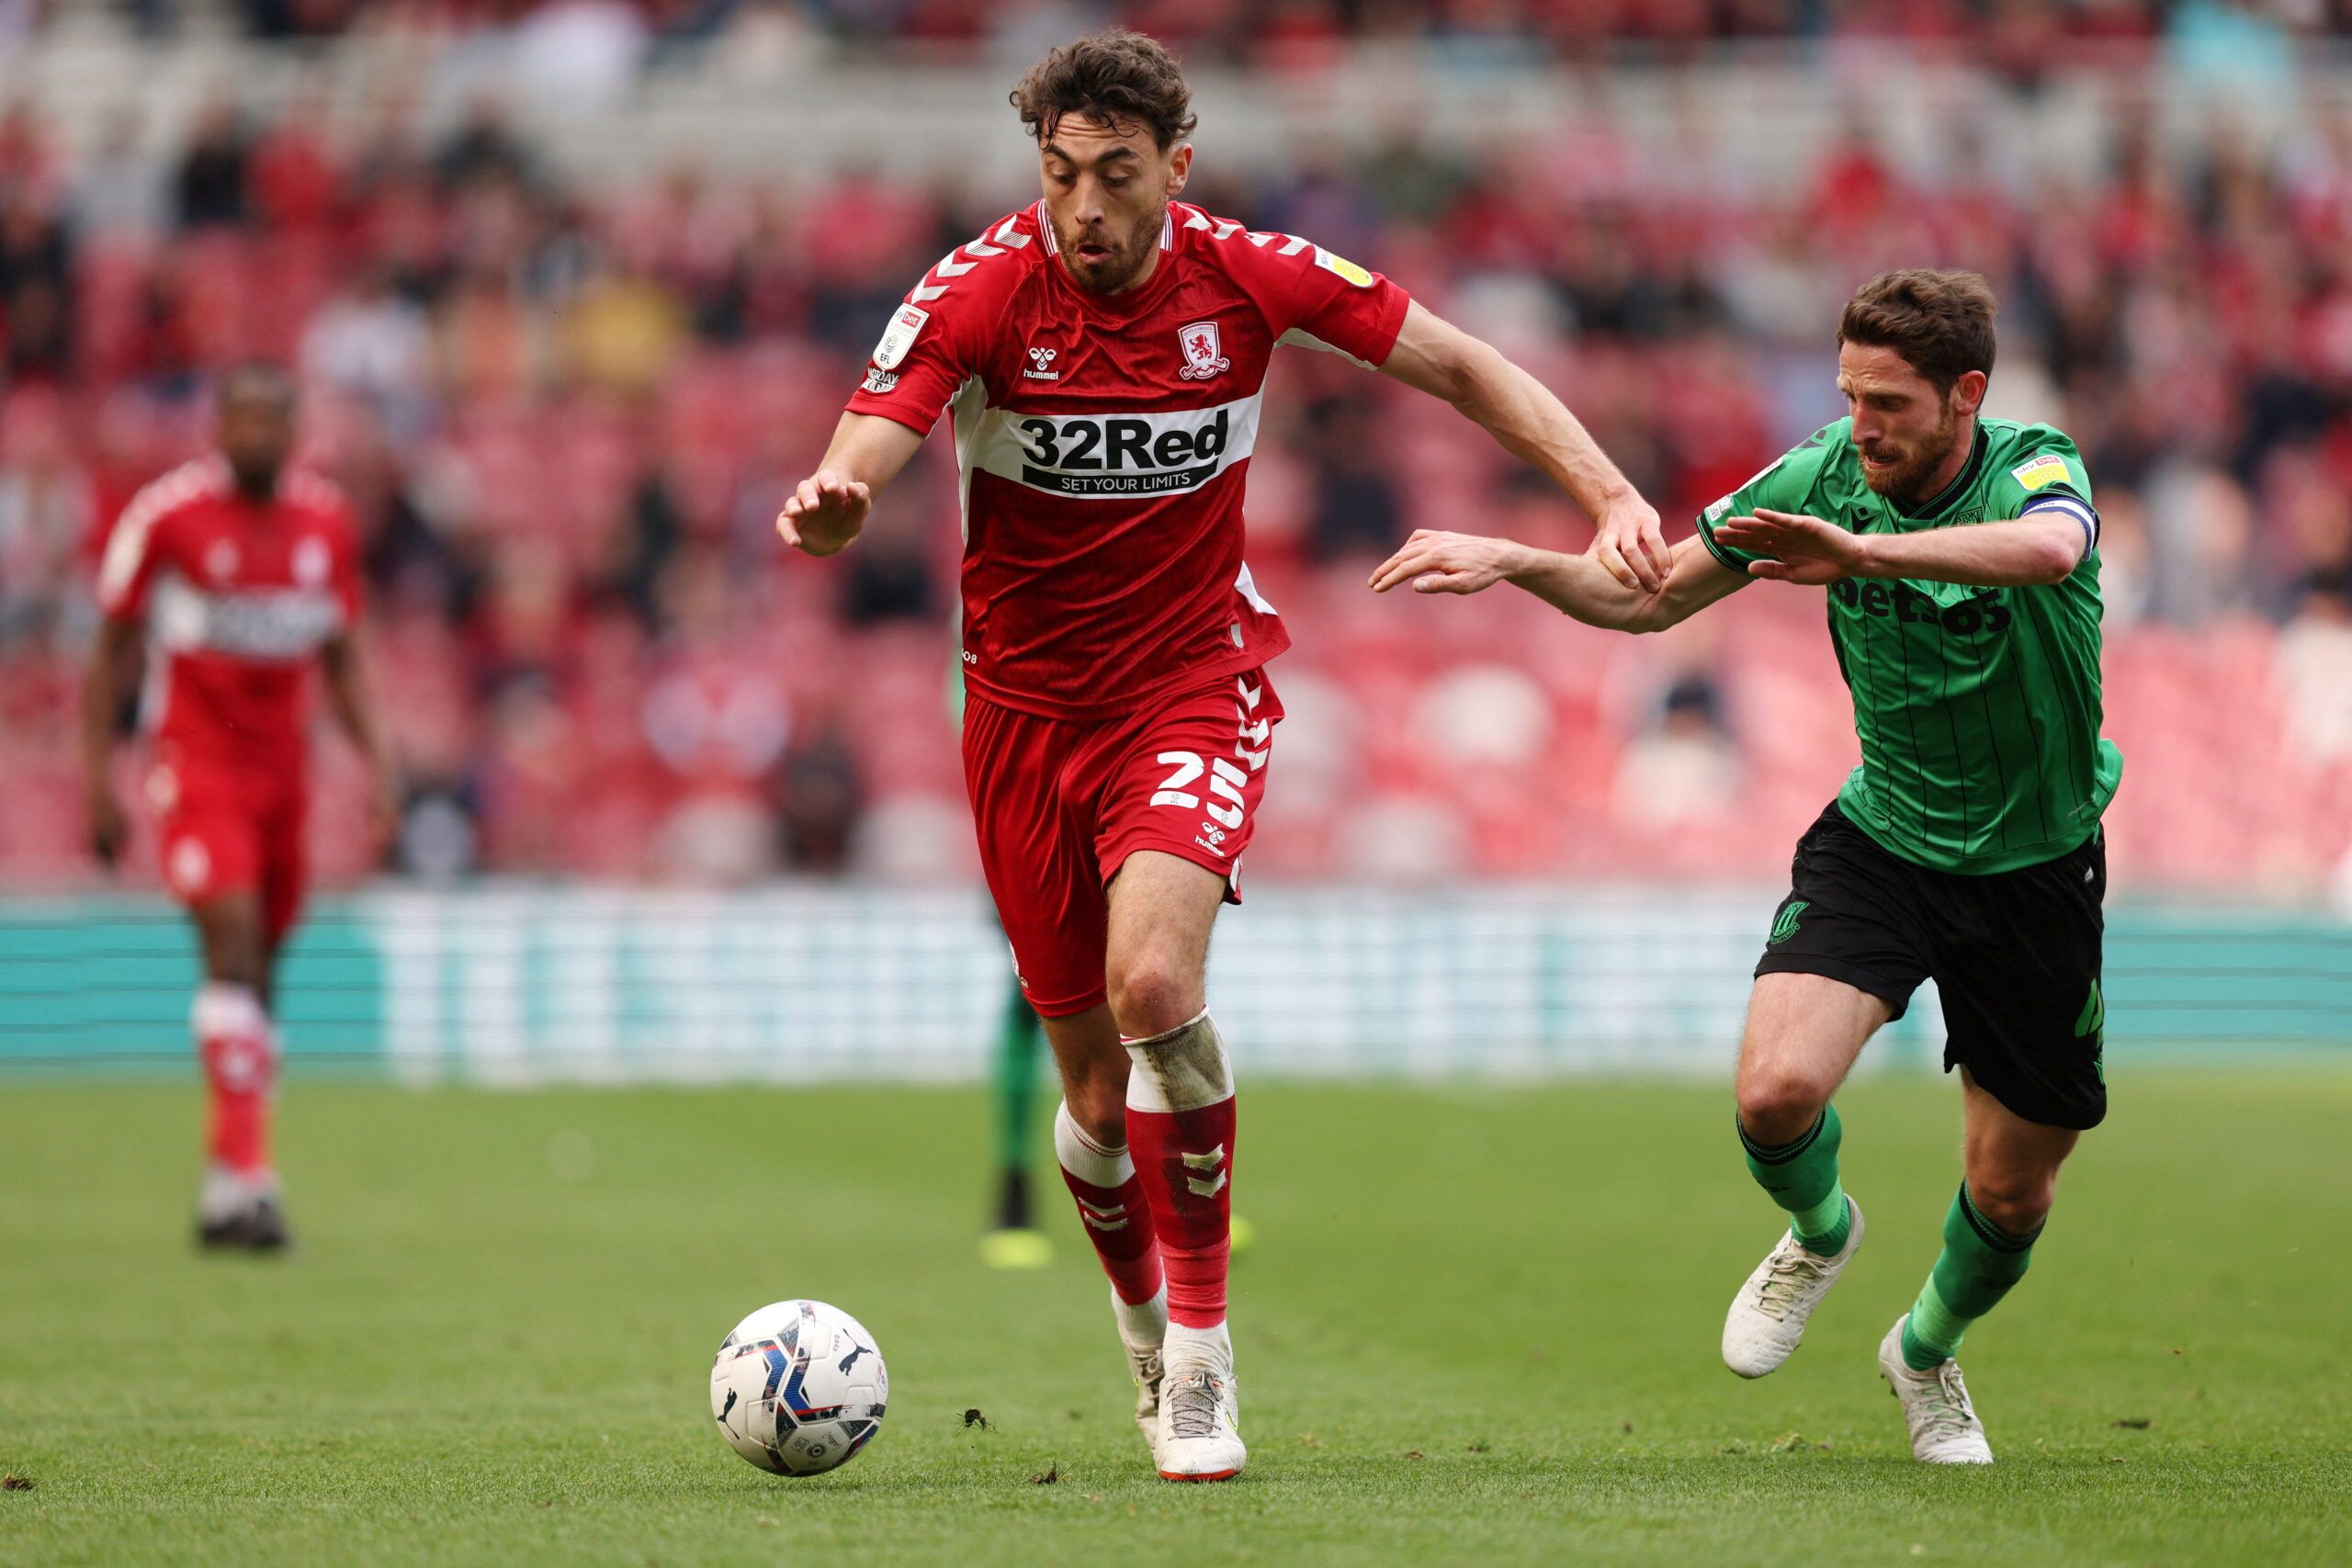 Soccer Football - Championship - Middlesbrough v Stoke City - Riverside Stadium, Middlesbrough, Britain - April 30, 2022 Middlesbrough's Matt Crooks in action with Stoke City's Joe Allen   Action Images/John Clifton  EDITORIAL USE ONLY. No use with unauthorized audio, video, data, fixture lists, club/league logos or 